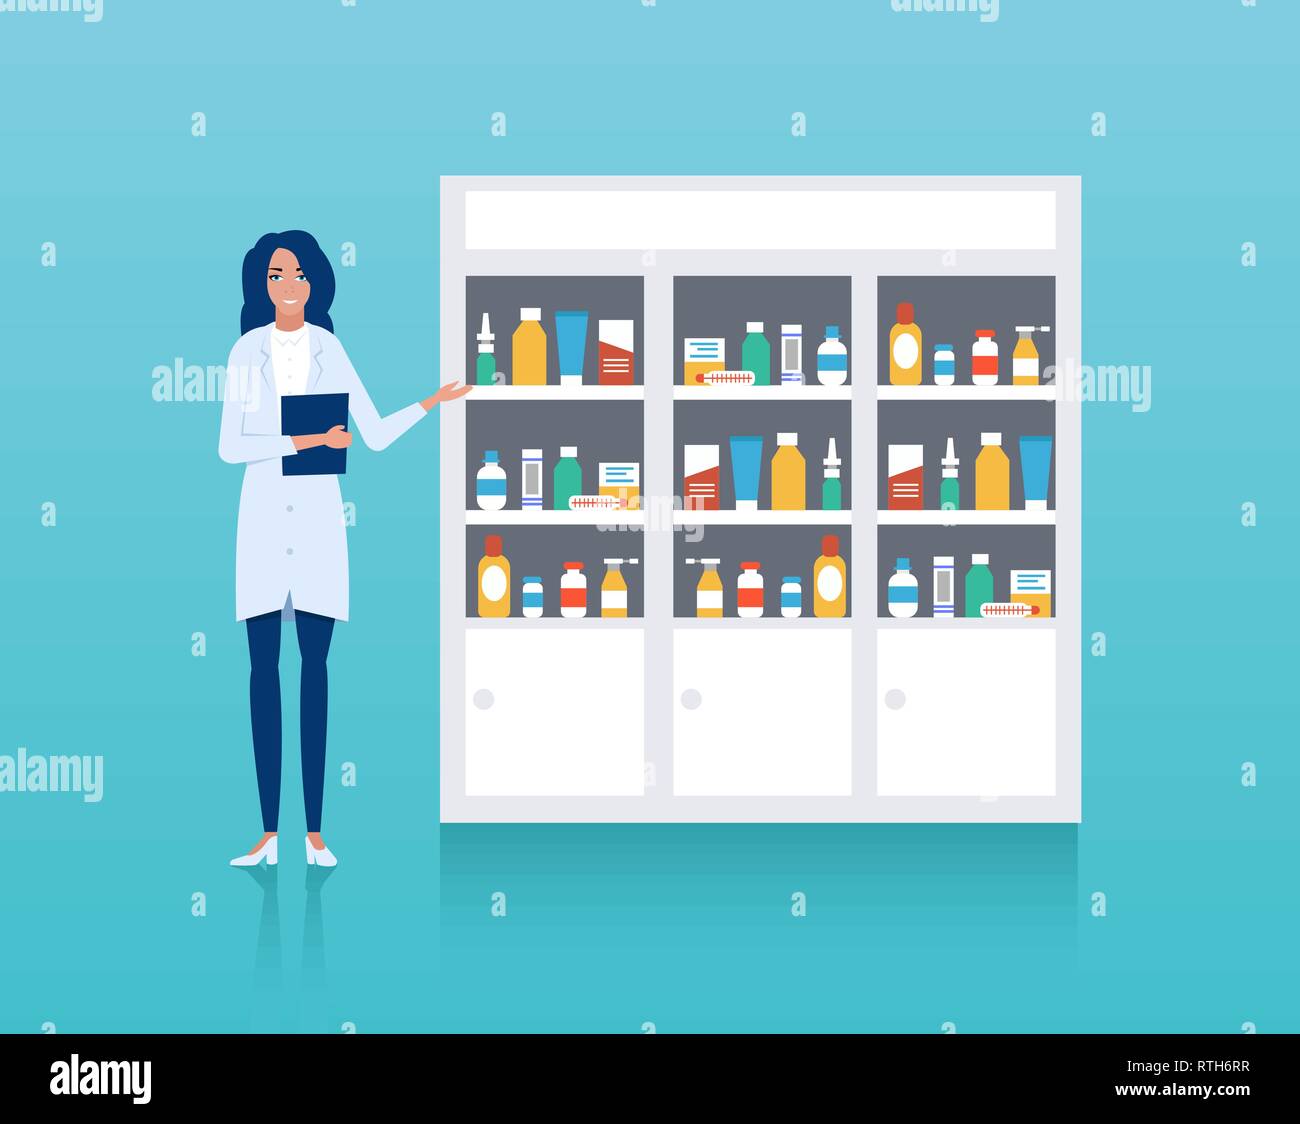 Pharmacist workplace. Vector of pharmacy counter with shelves and health care professional Stock Vector